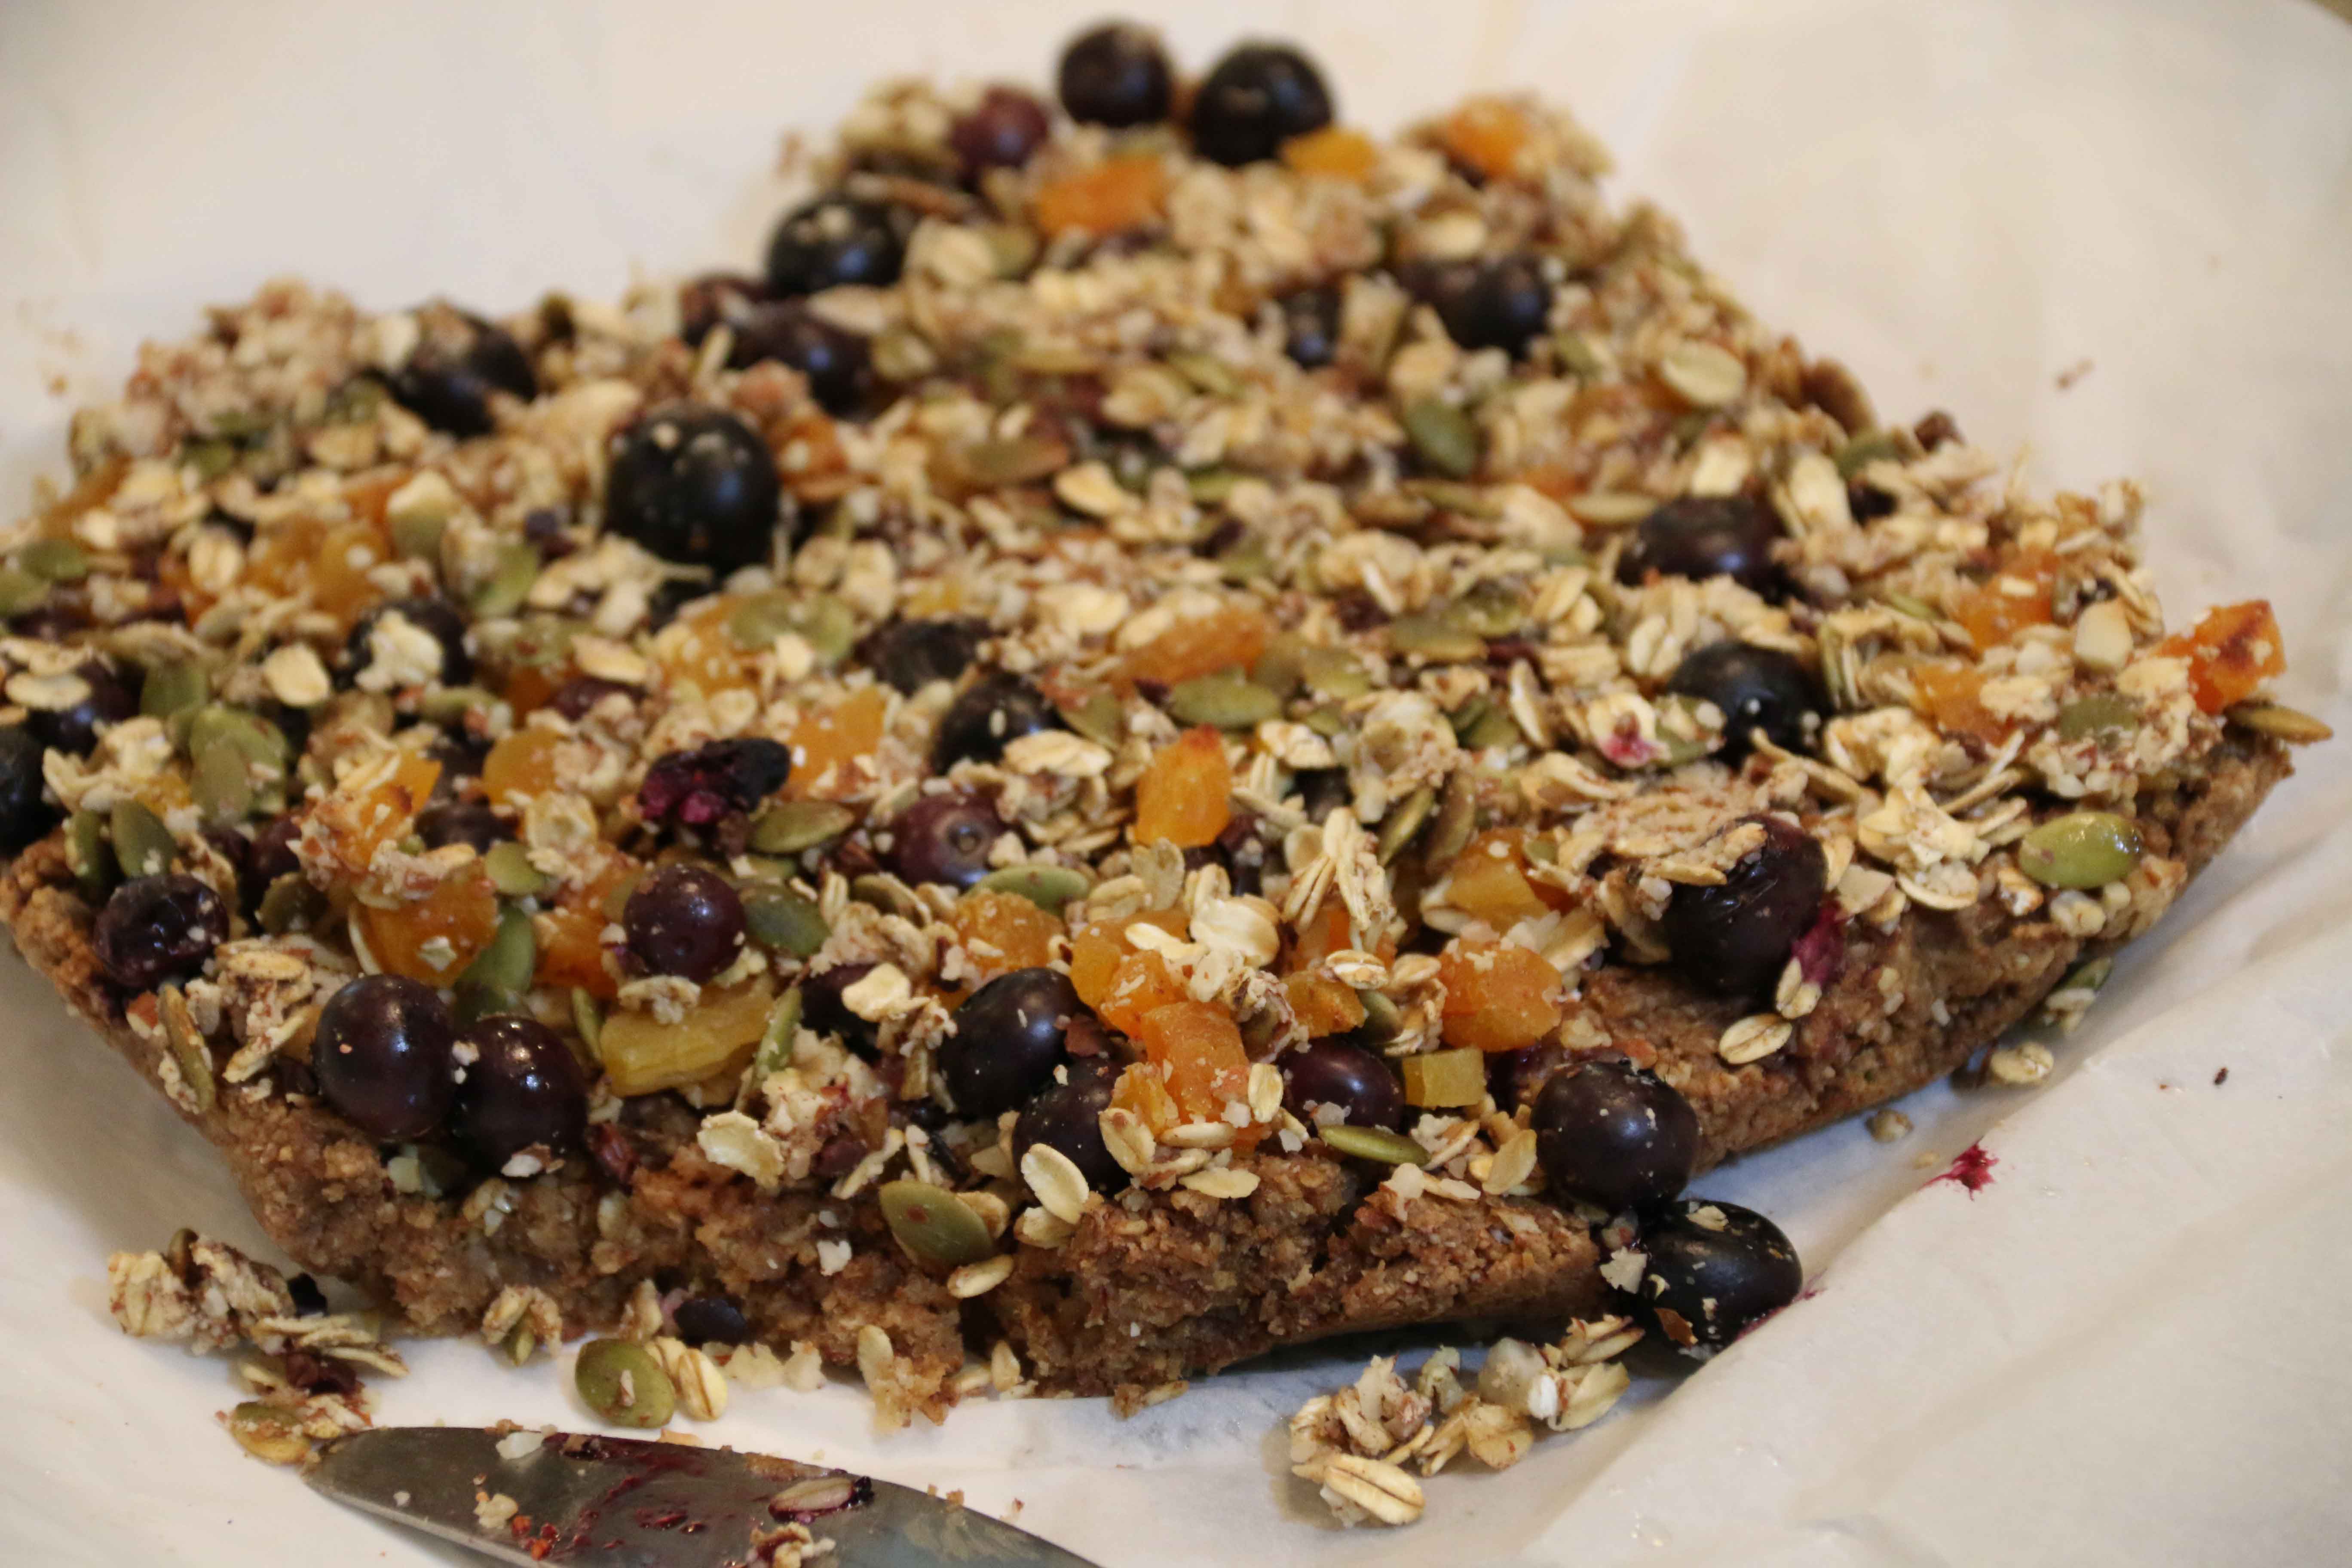 Breakfast Bar Recipe for Those Busy Mornings! Make Ahead of Time and